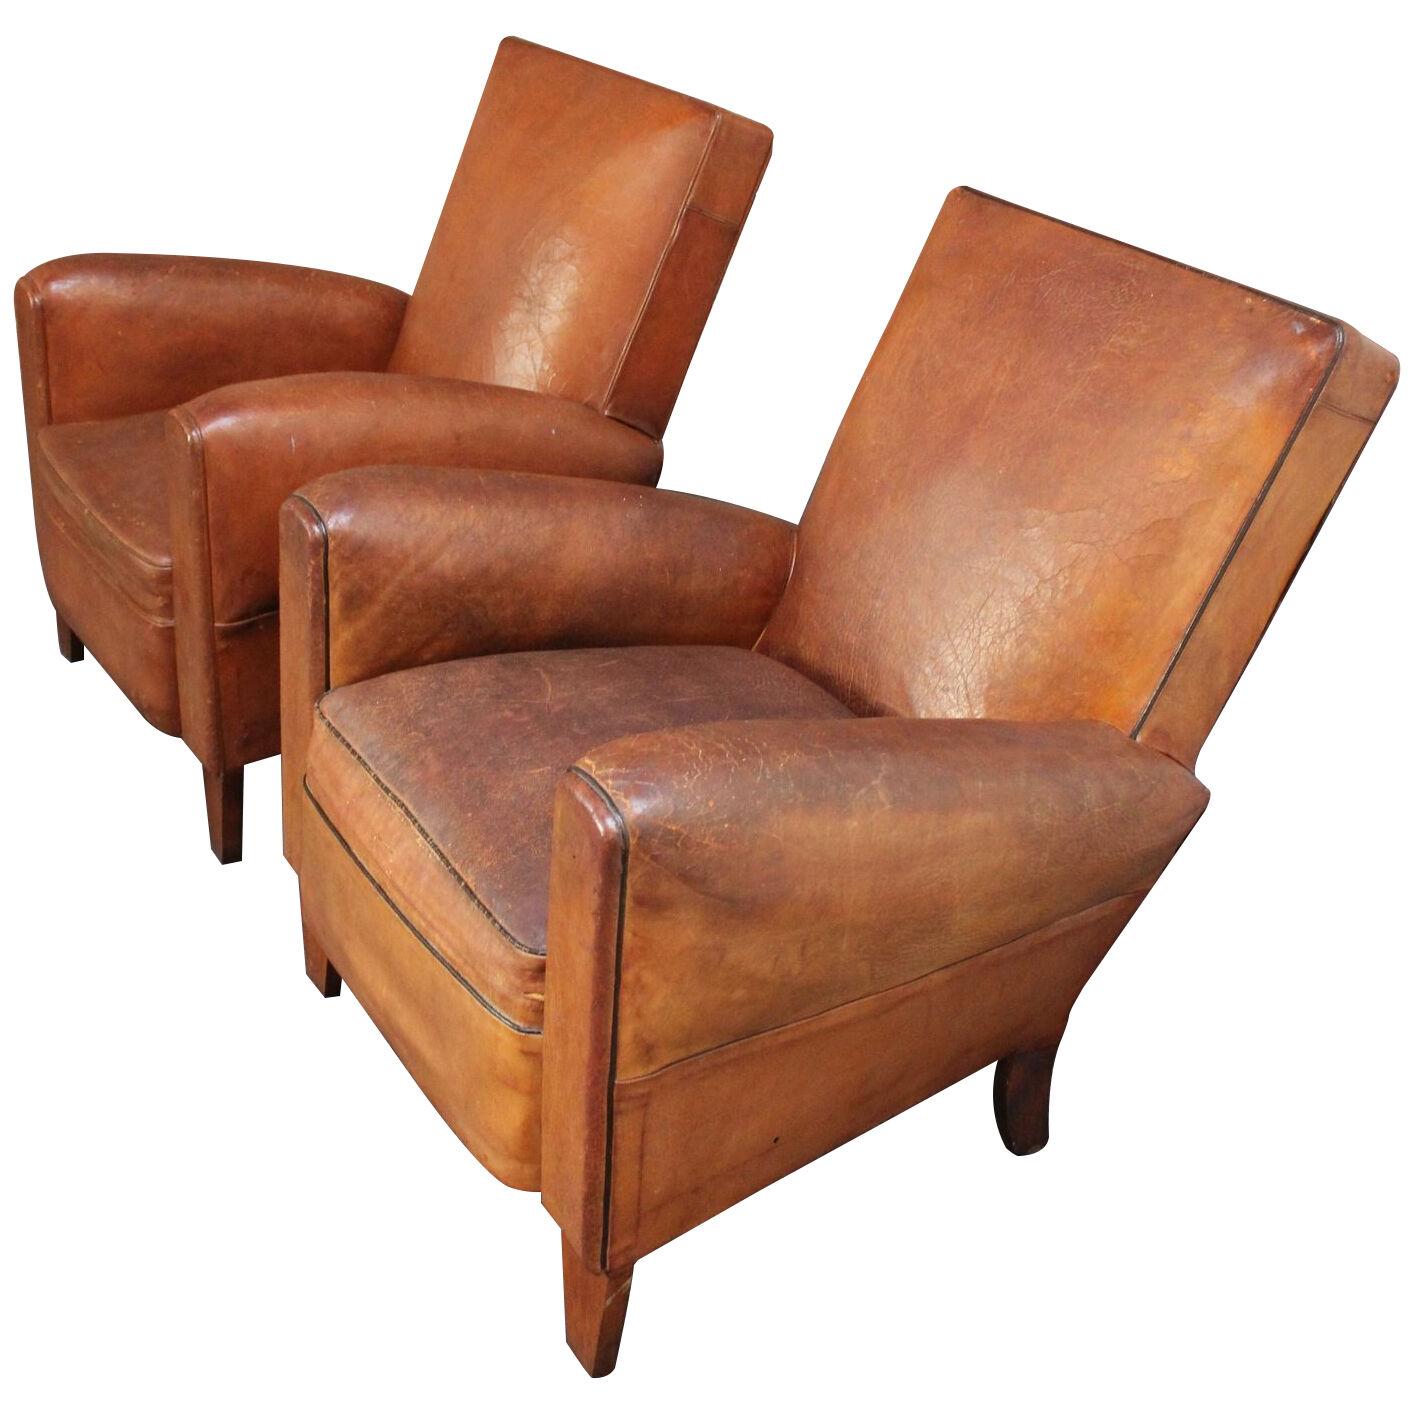 Pair of French Deco Leather Squared-Back Club Chairs